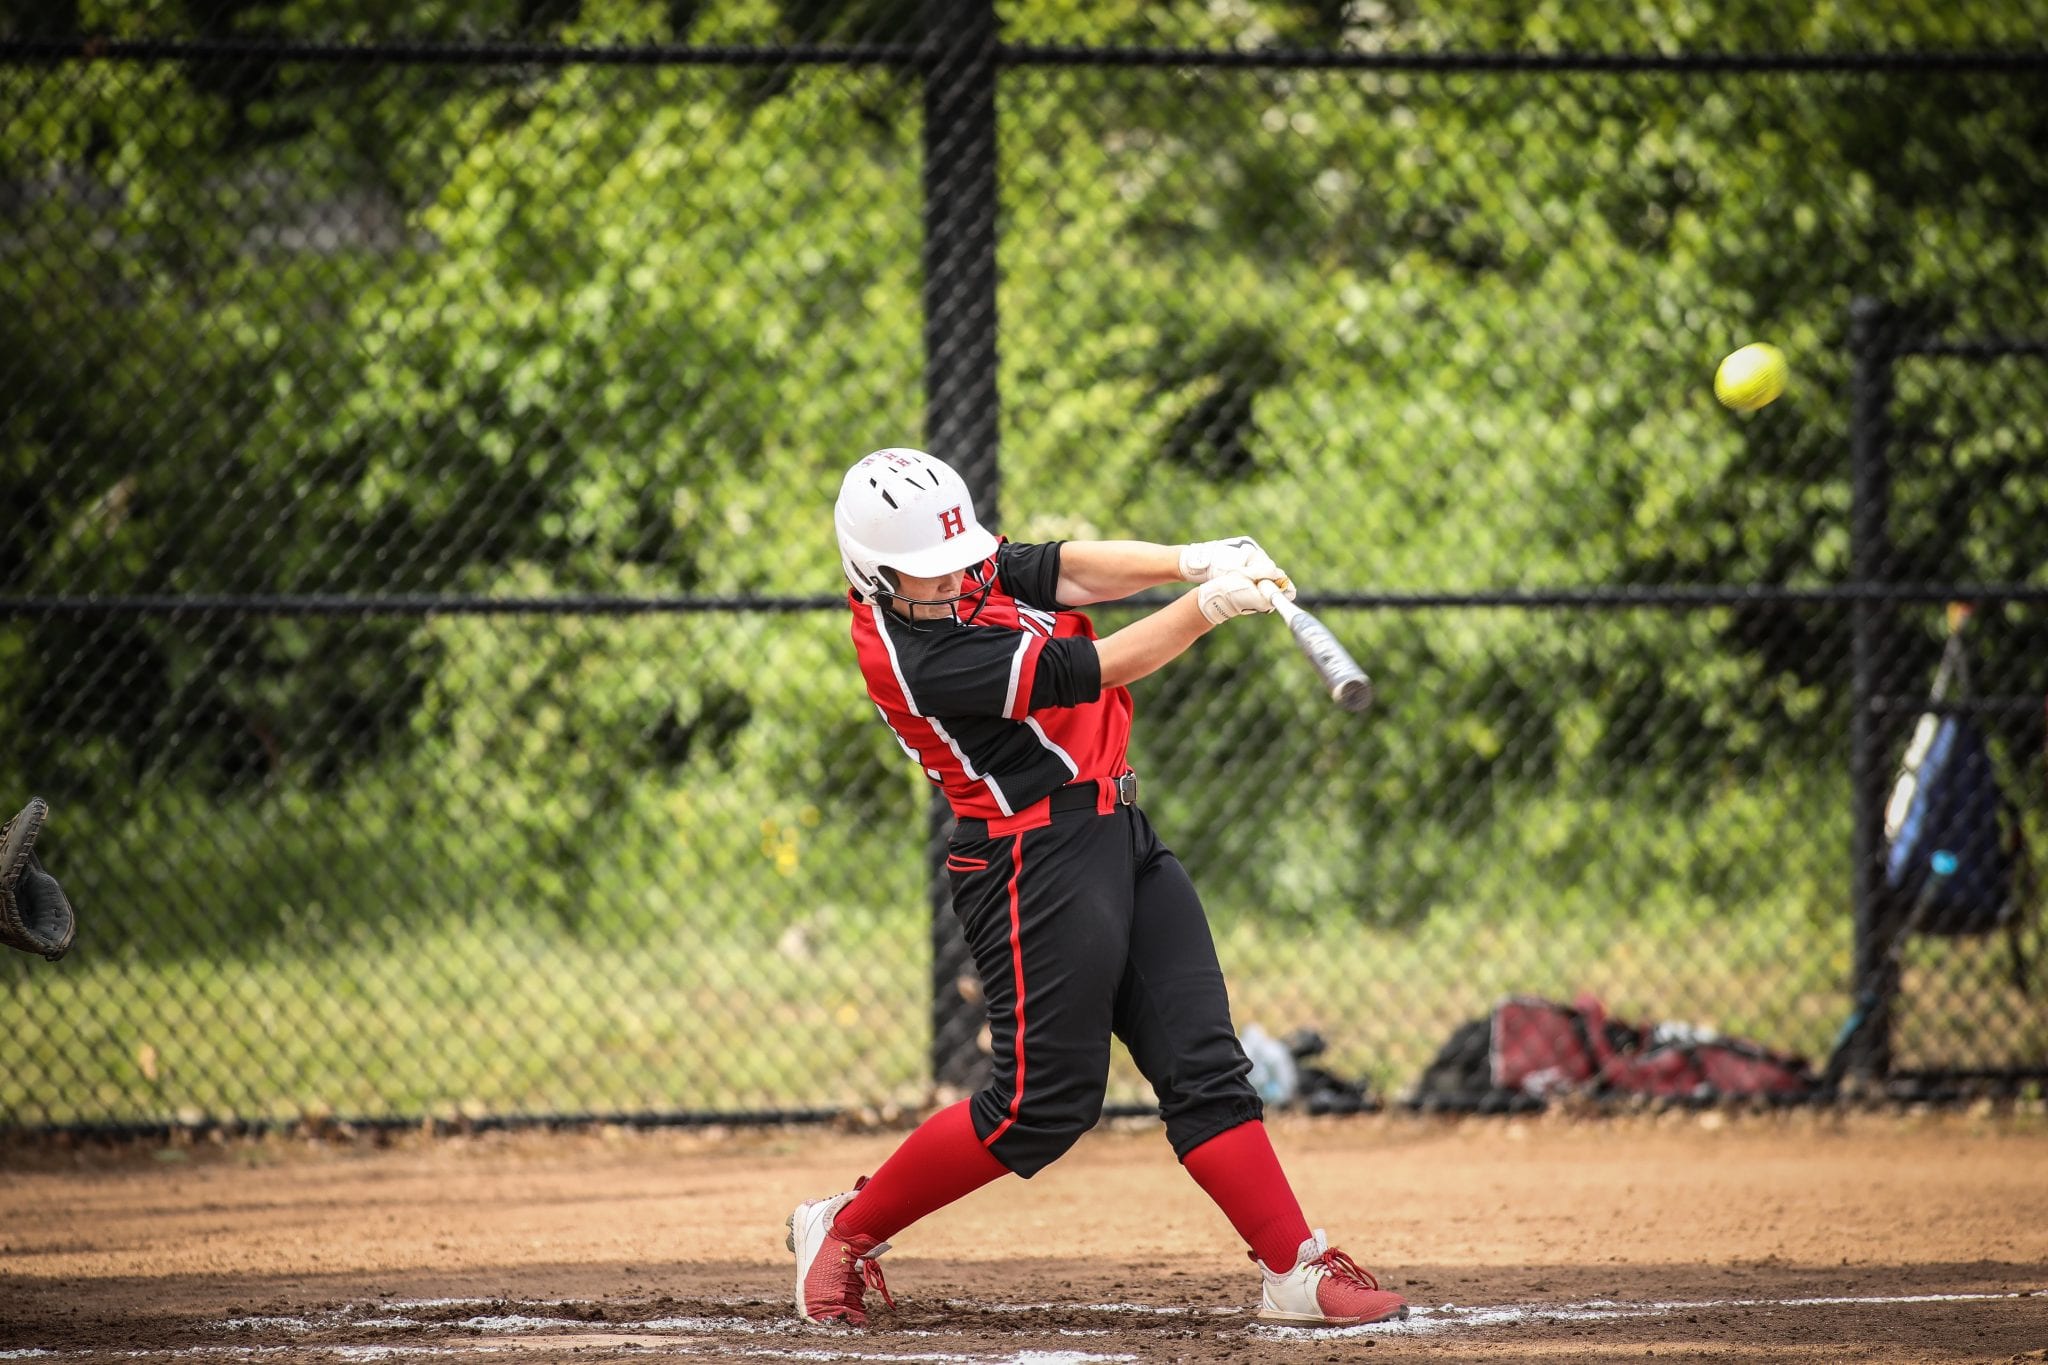 Sophomore Sarah Holler launched this pitch over the centerfield fence for what is believed to be the first grand slam in HHS softball history. 